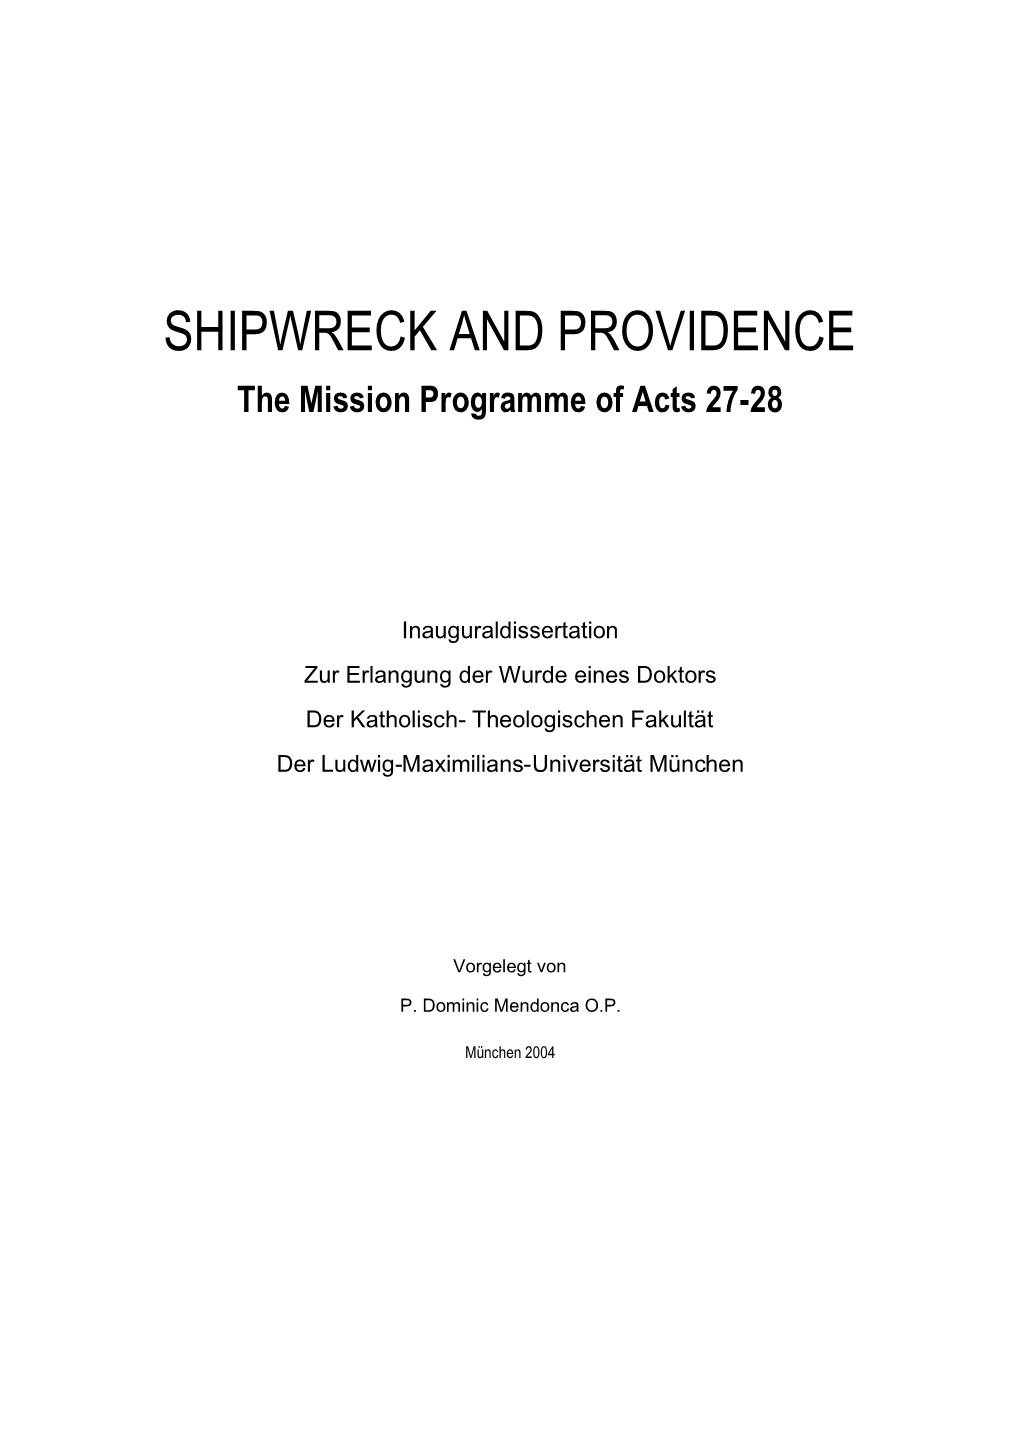 SHIPWRECK and PROVIDENCE the Mission Programme of Acts 27-28